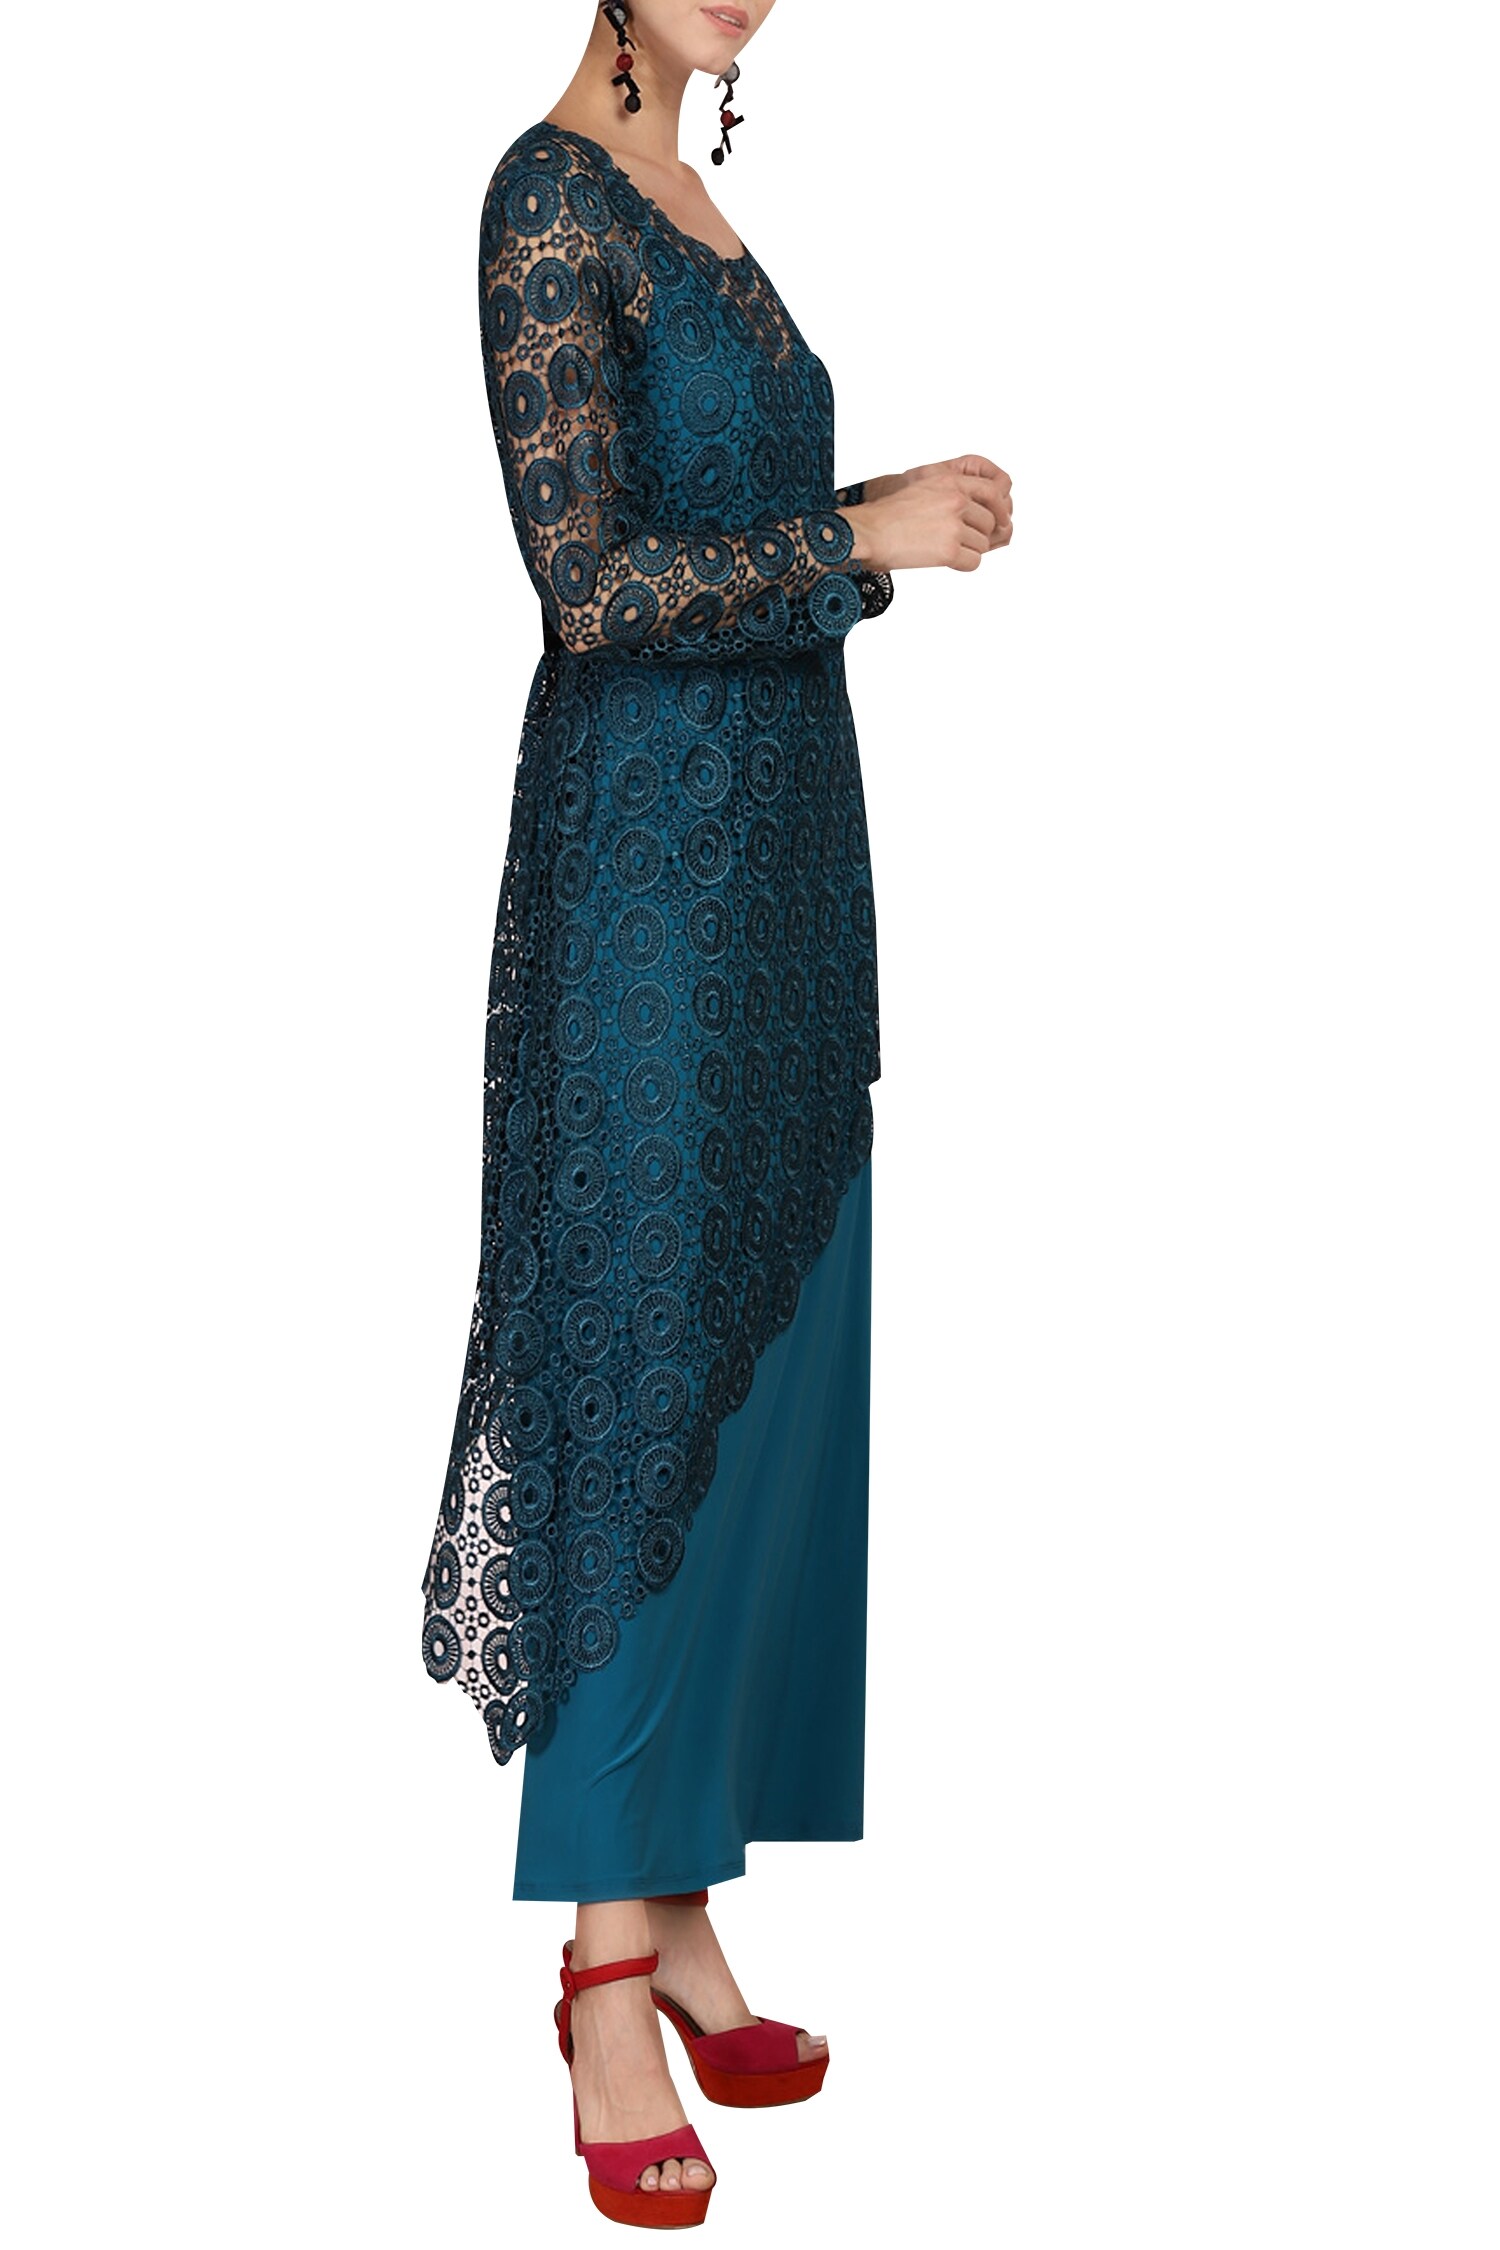 Buy Lace & Knitted Full Sleeve Dress by Kommal Sood at Aza Fashions